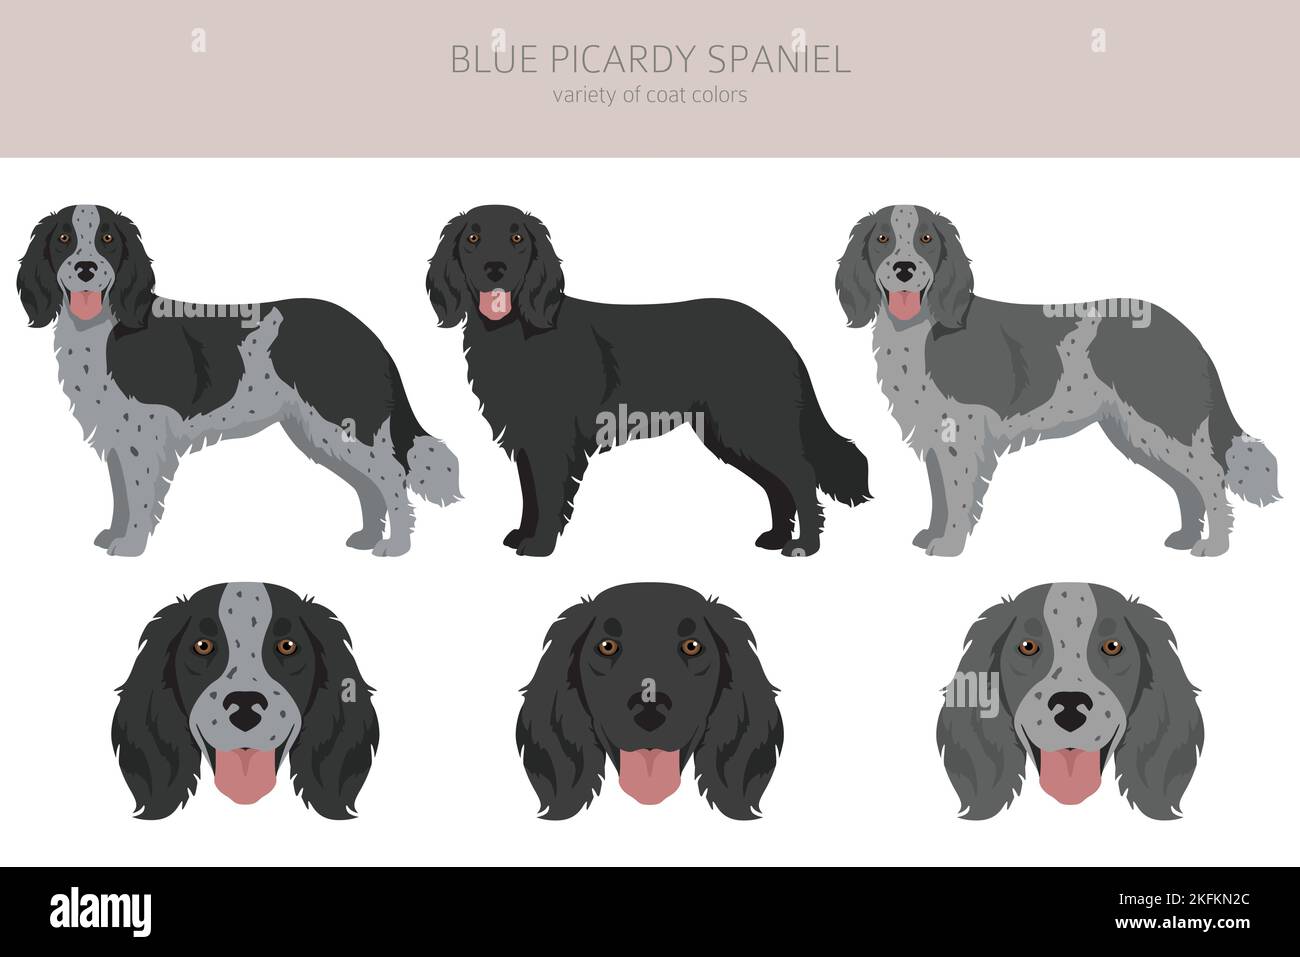 Blue Picardy Spaniel clipart. Different coat colors and poses set.  Vector illustration Stock Vector